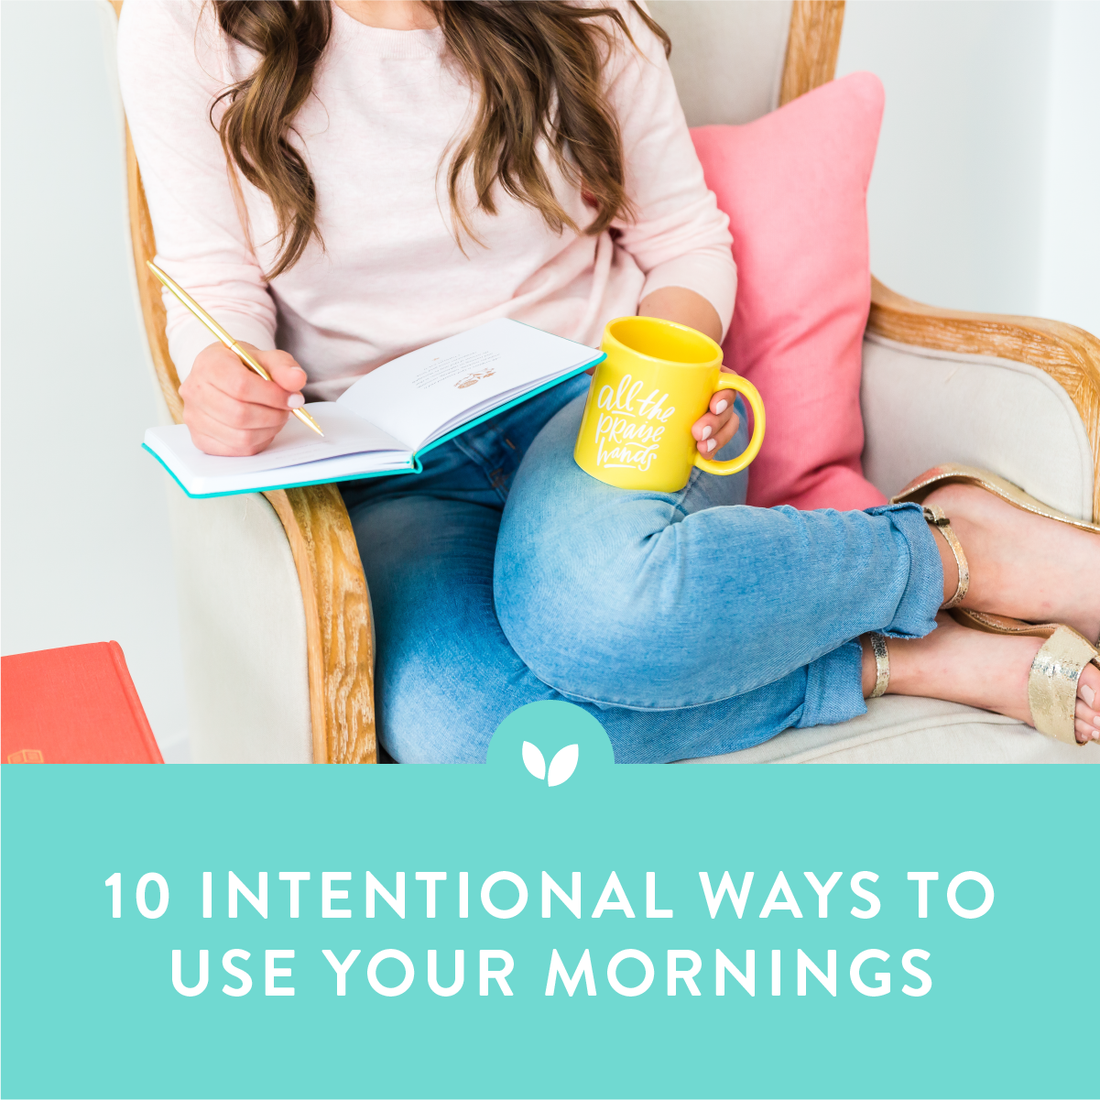 10 Intentional Ways to Use Your Mornings